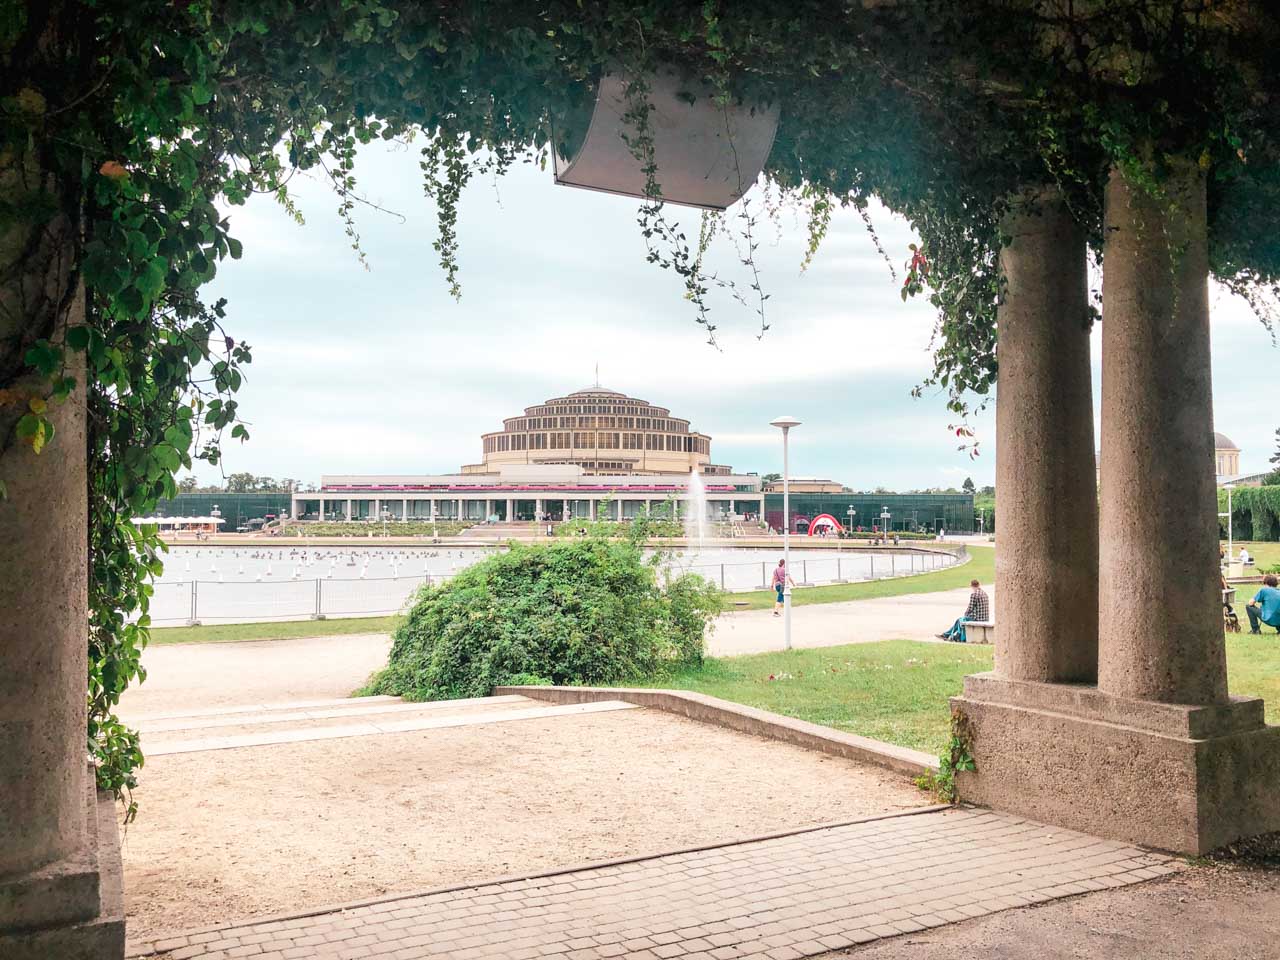 Centennial Hall in Wrocław seen from one of the surrounding ivy-covered pergolas